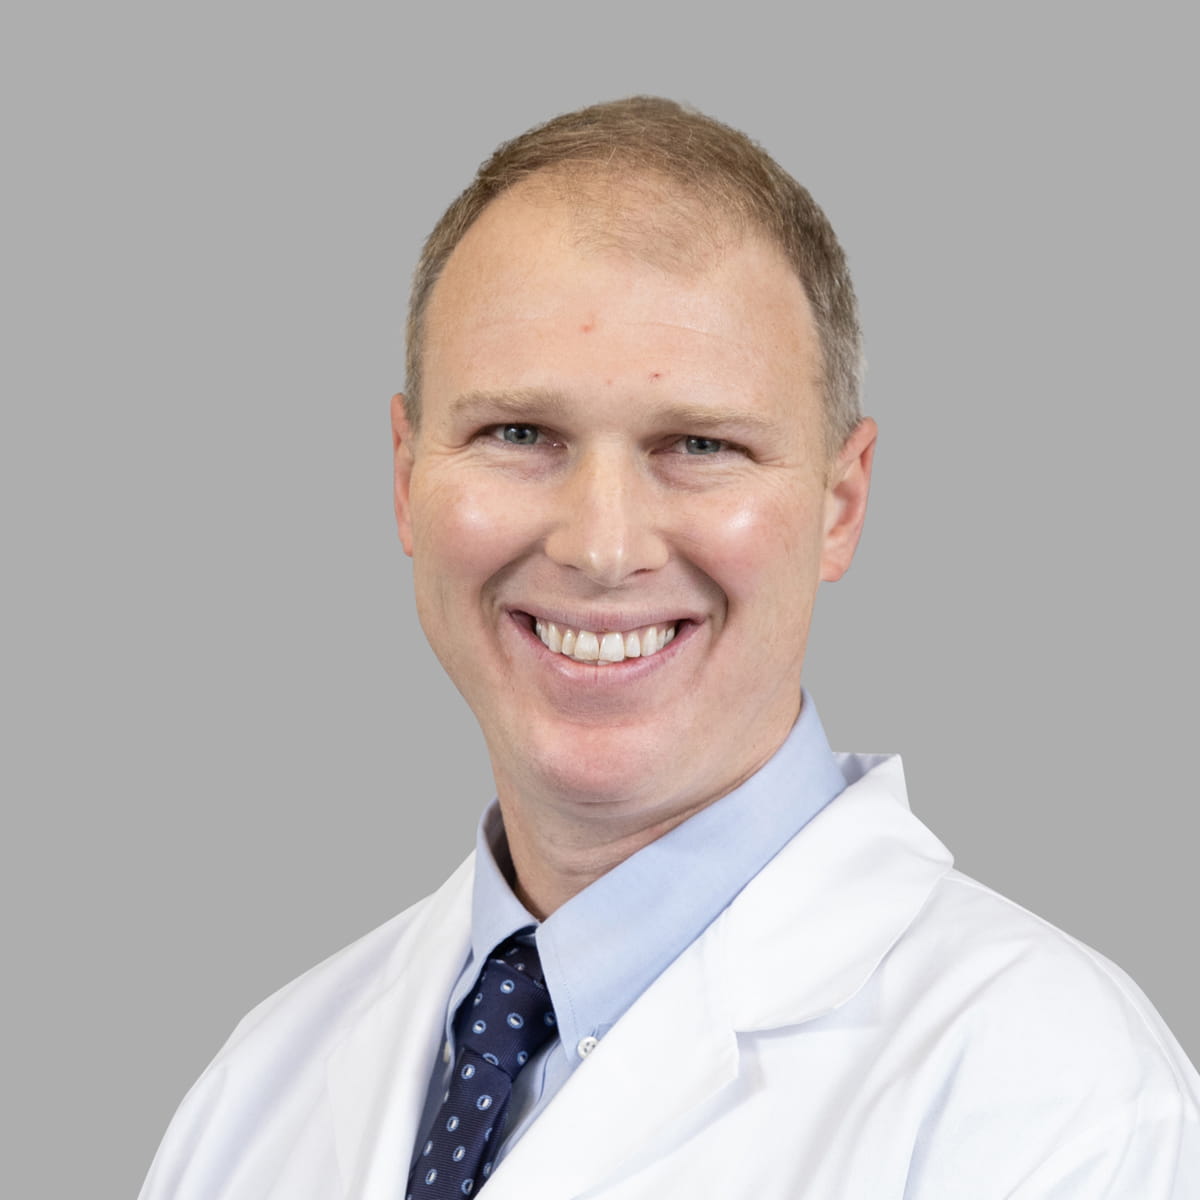 A friendly image of Steve Schulenborg MD